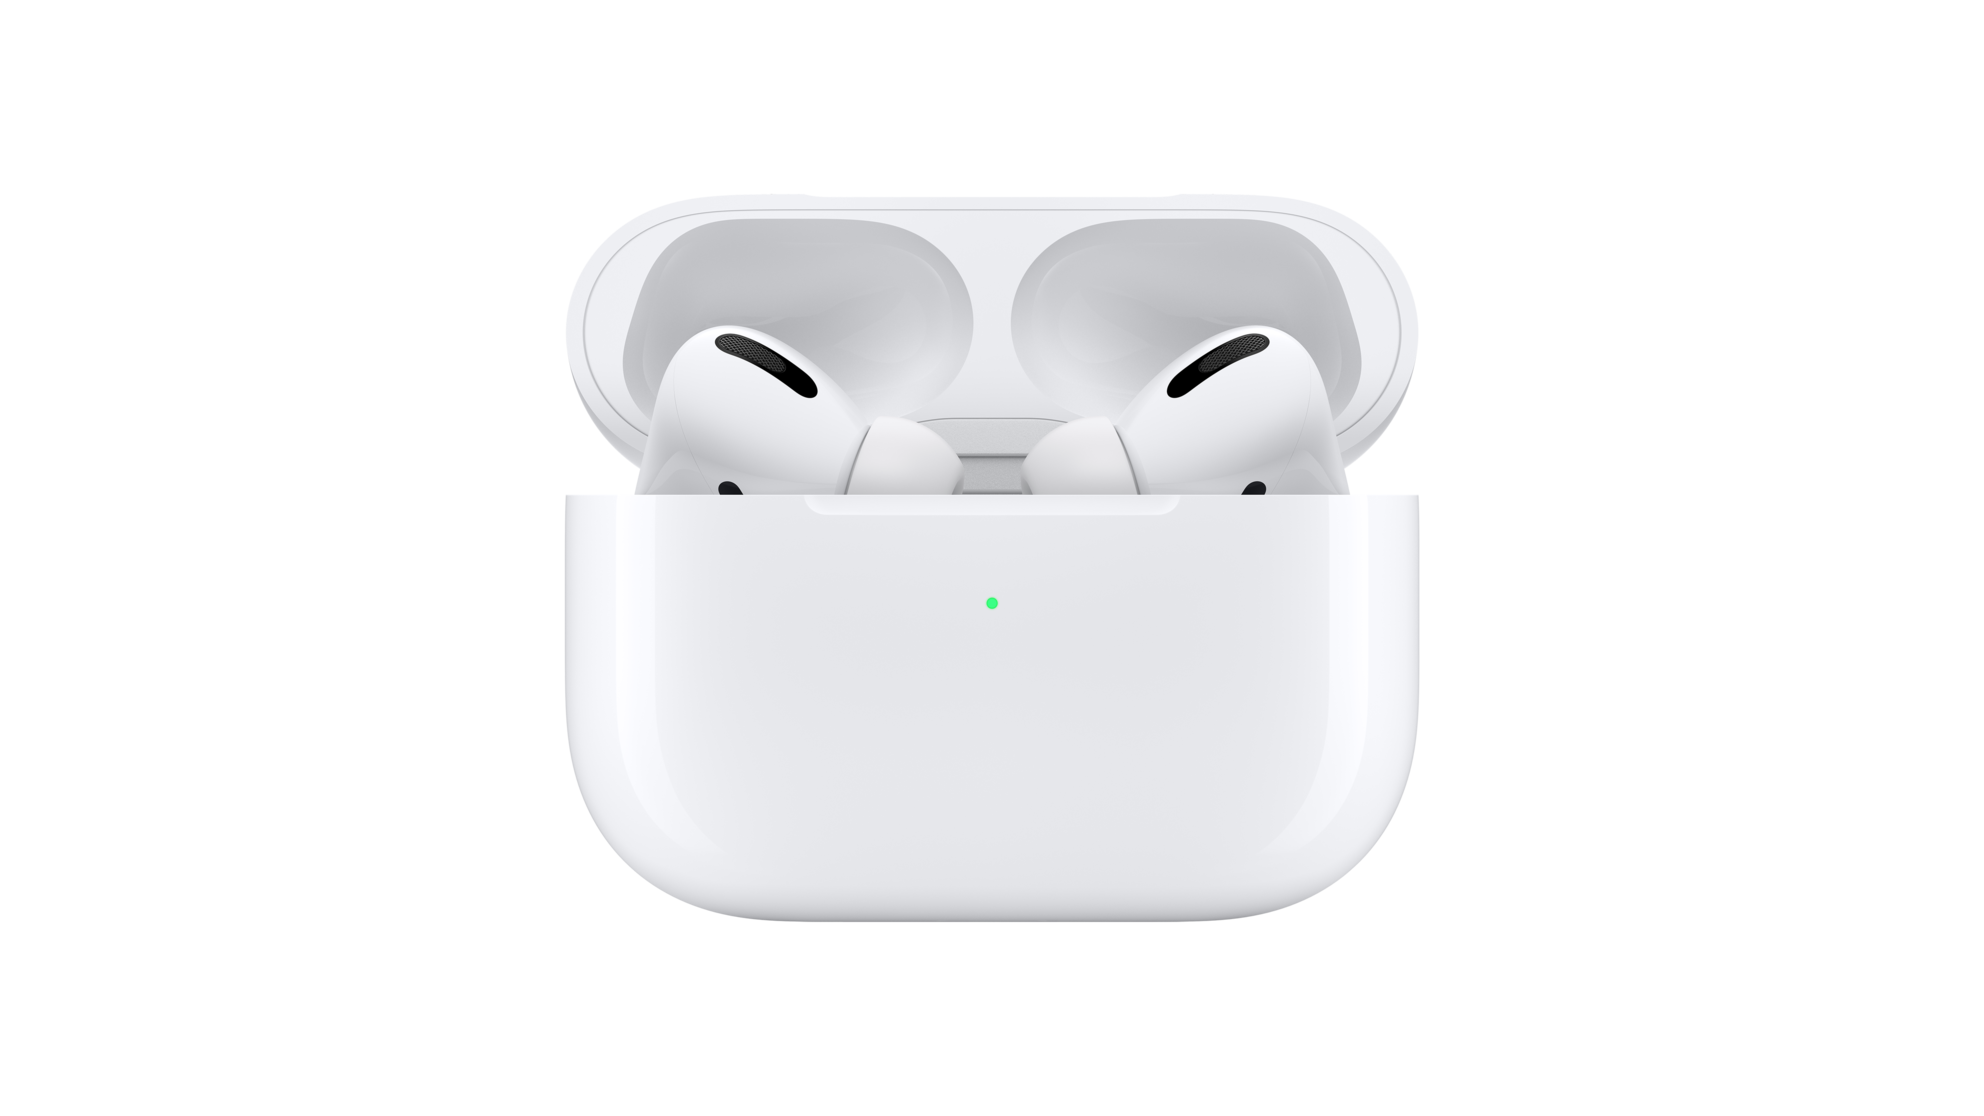 airpods, apple news articles stories trends for today #32434